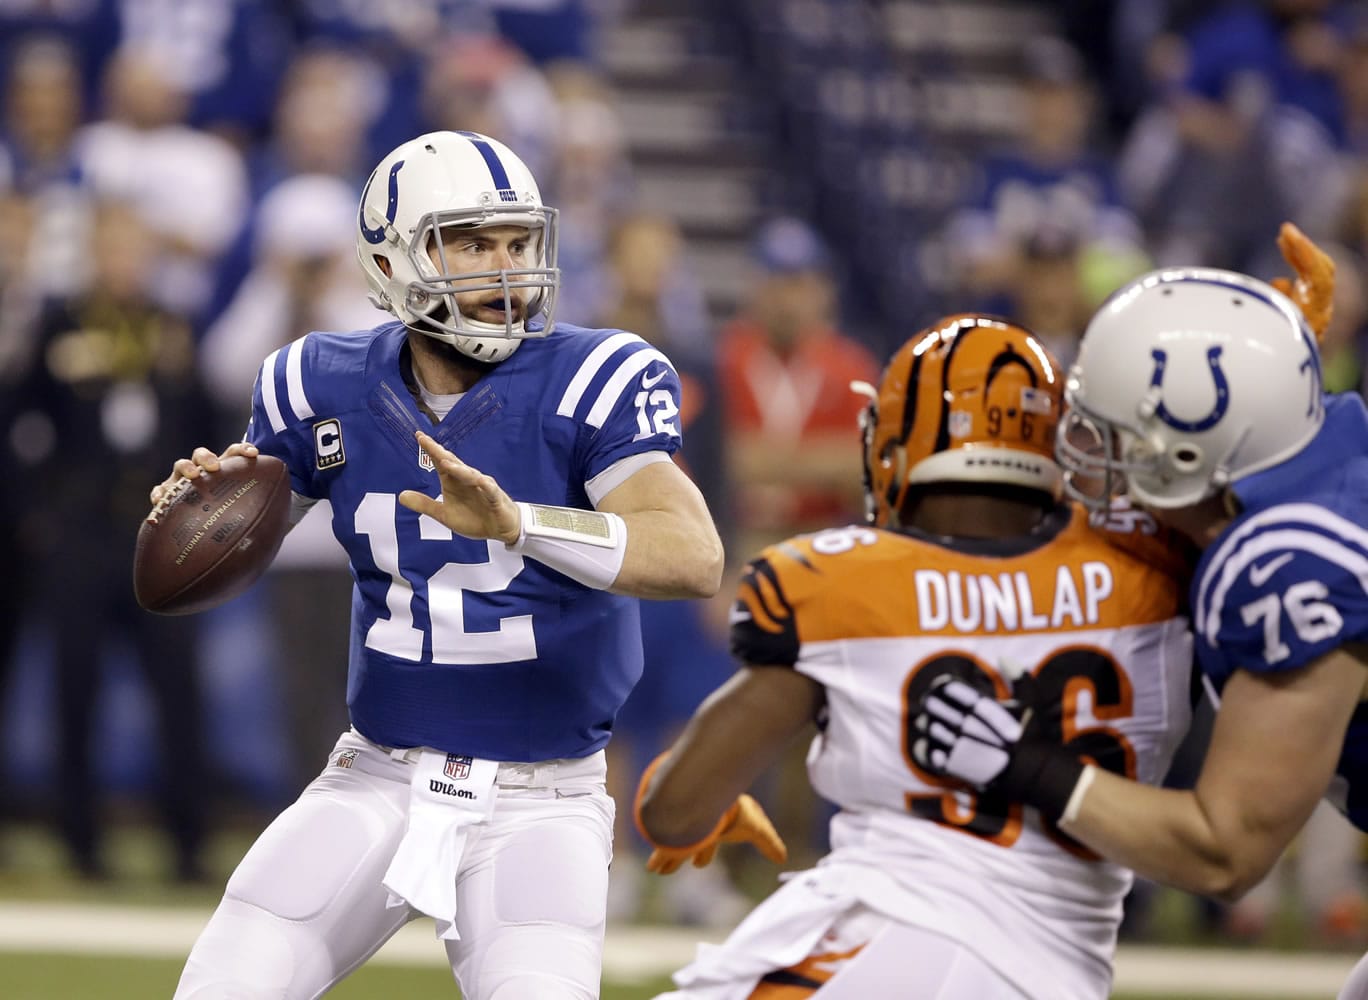 Indianapolis Colts quarterback Andrew Luck, left, looks to throw as Colts' offensive guard Jack Mewhort, right, blocks Cincinnati Bengals defensive end Carlos Dunlap during the first half Sunday, Jan. 4, 2015, in Indianapolis.